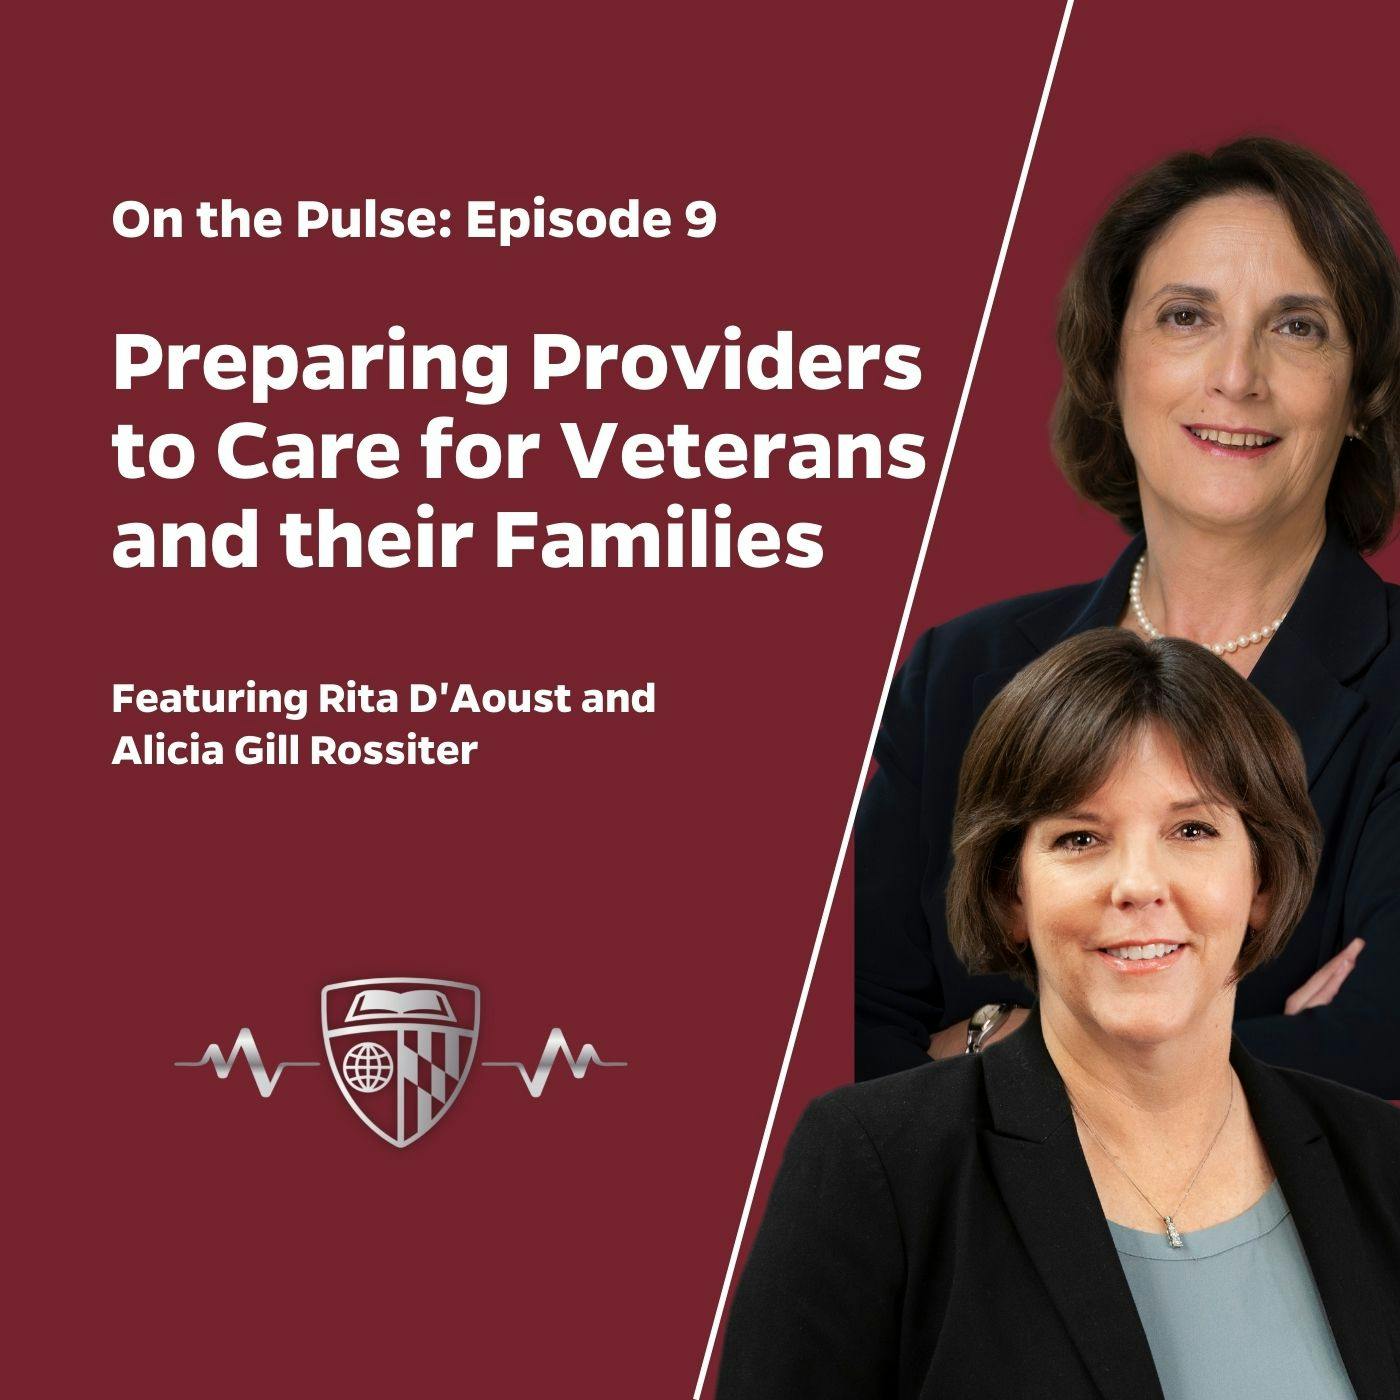 On The Pulse: Preparing Providers to Care for Veterans and their Families